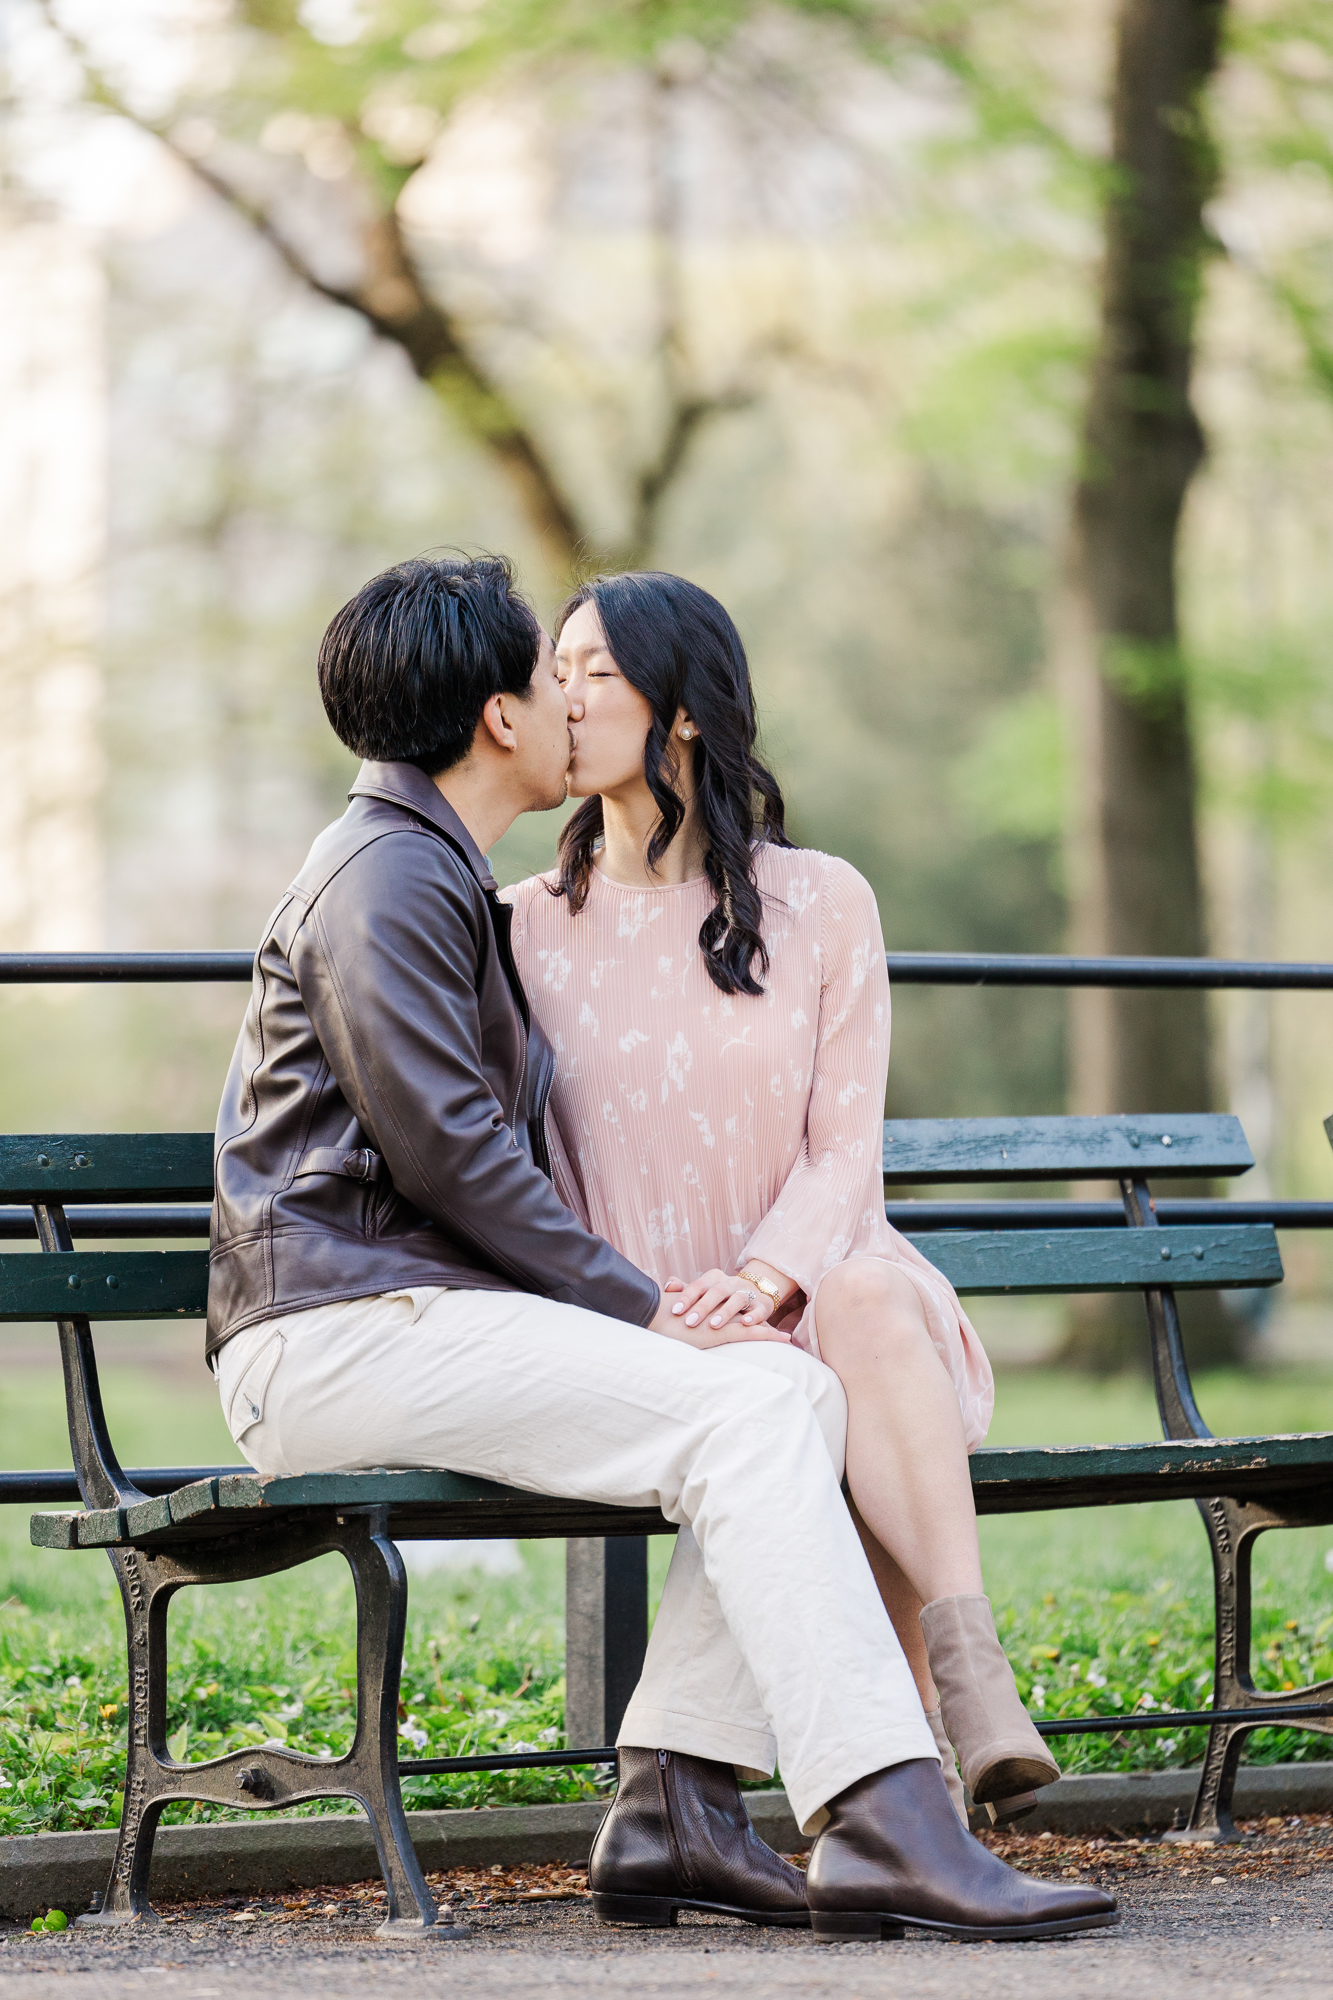 Pretty Central Park Engagement Photos in the Spring